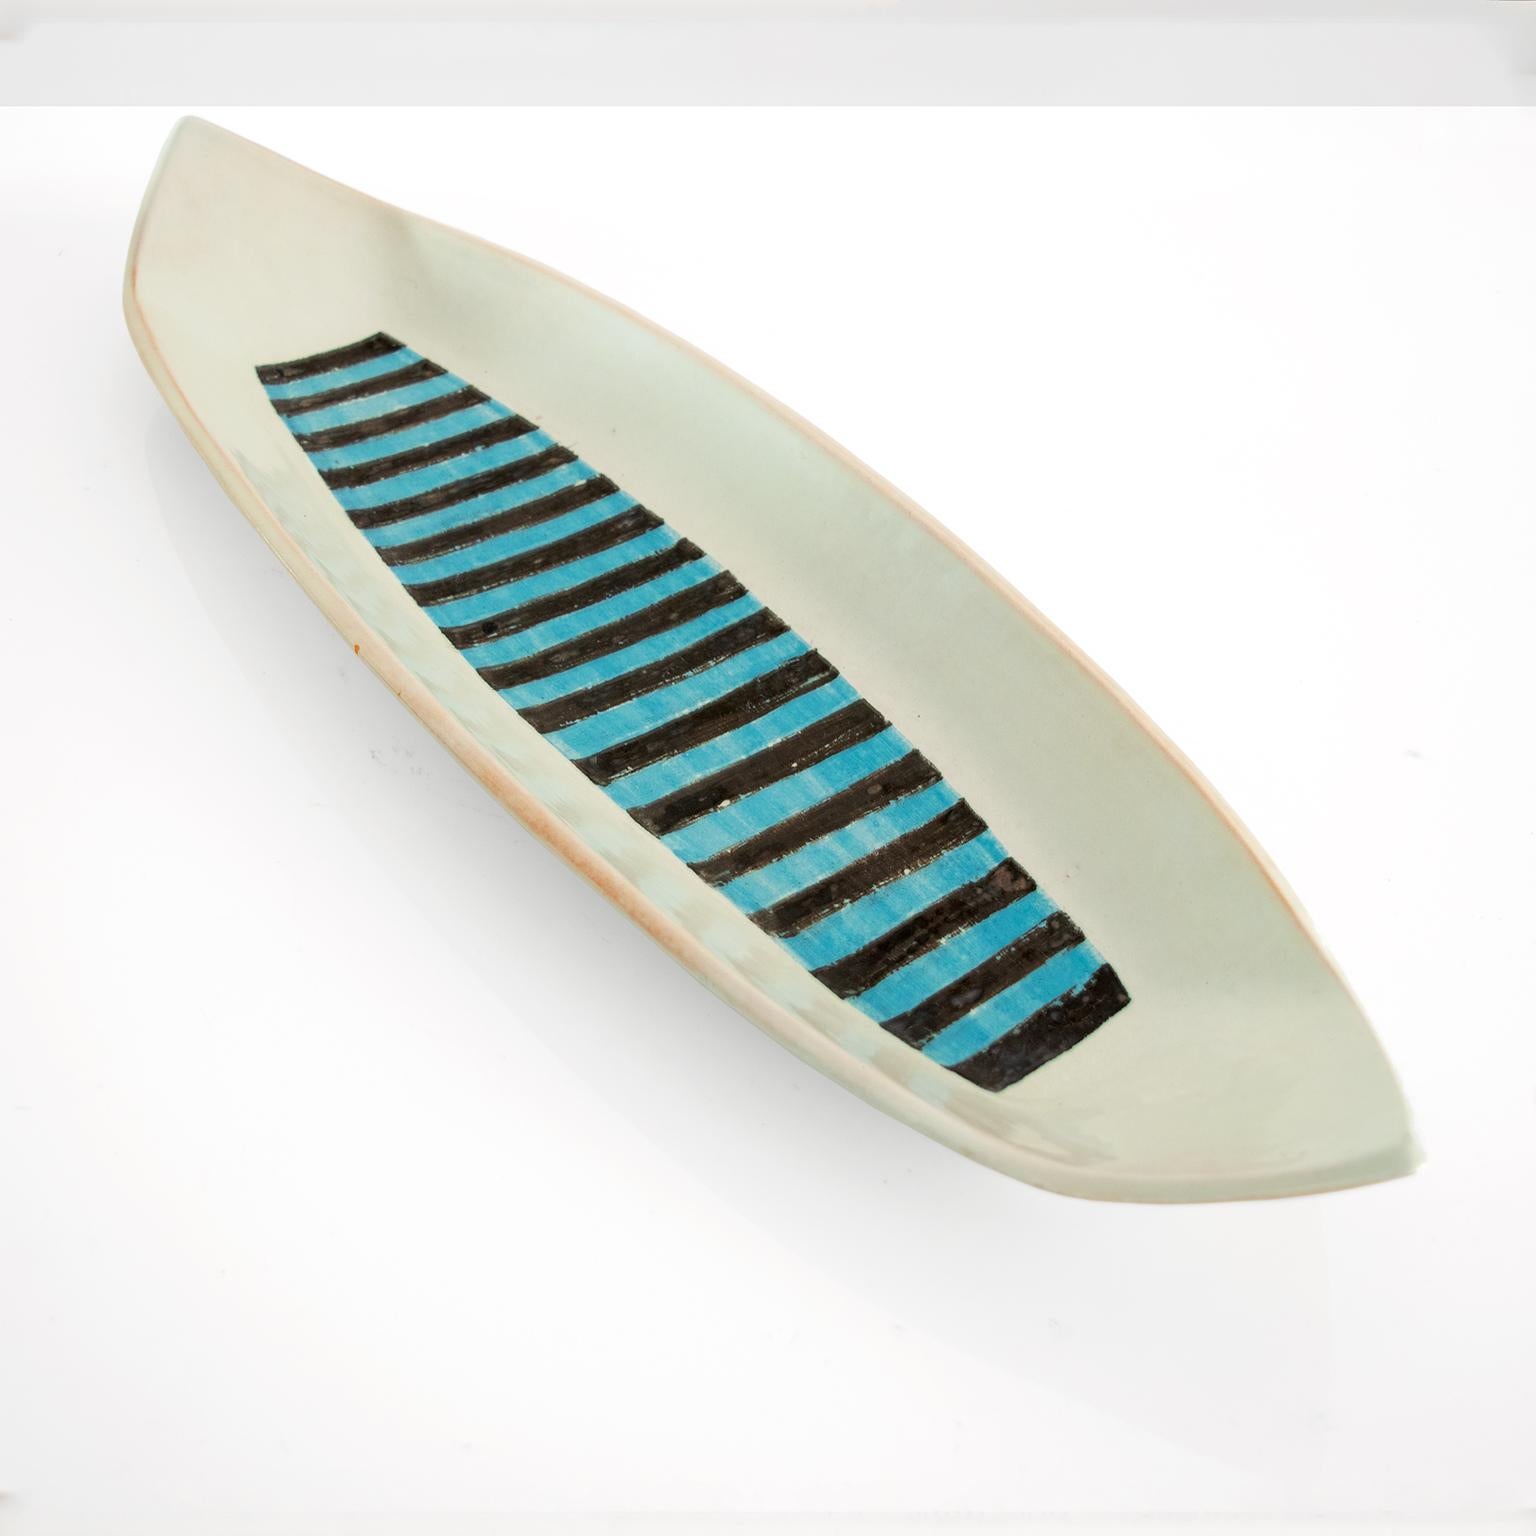 A large Scandinavian Modern “Torro” ceramic dish hand decorated with a blue and black pattern. This dishes are from a collaboration series by Carl Harry Stålhane and Aune Laukkanen for Rörstrand ca. 1950’s. 

Measures: length: 24.25“, width: